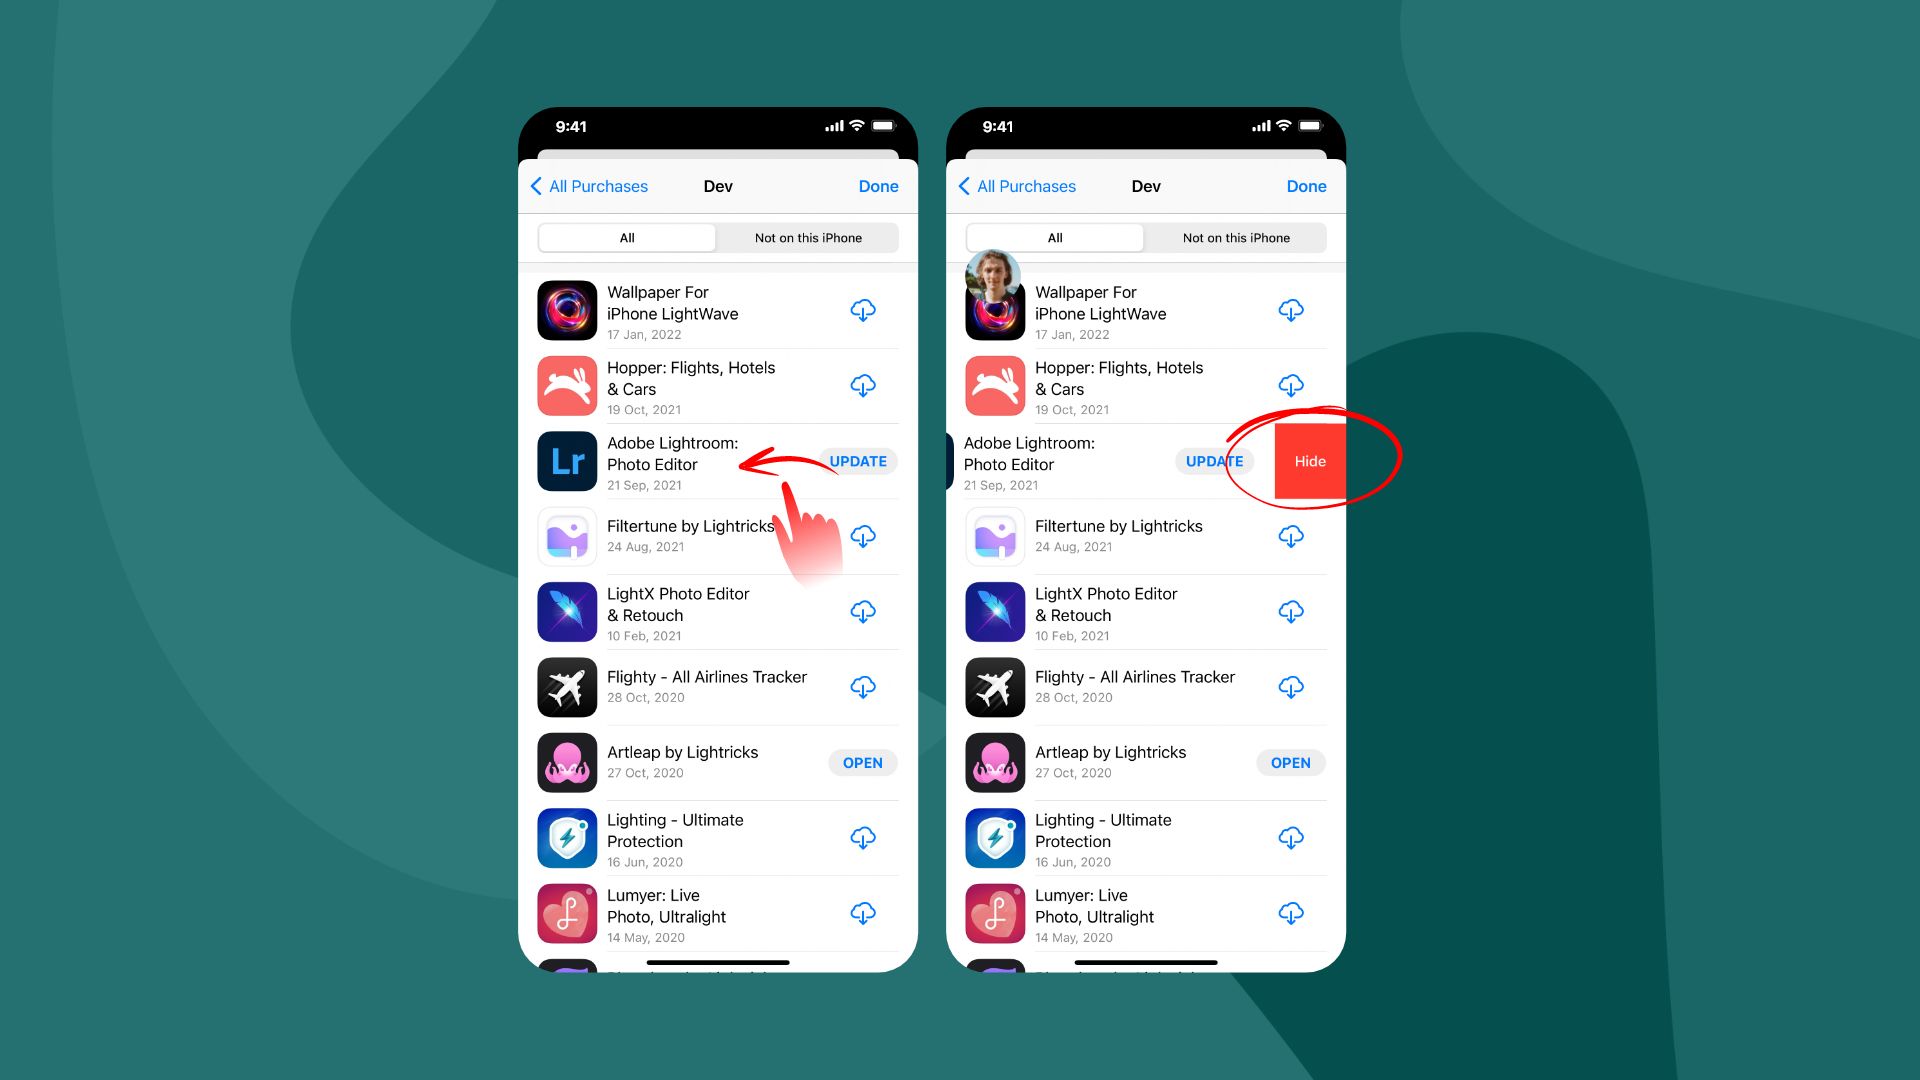 how to hide an app on iPhone